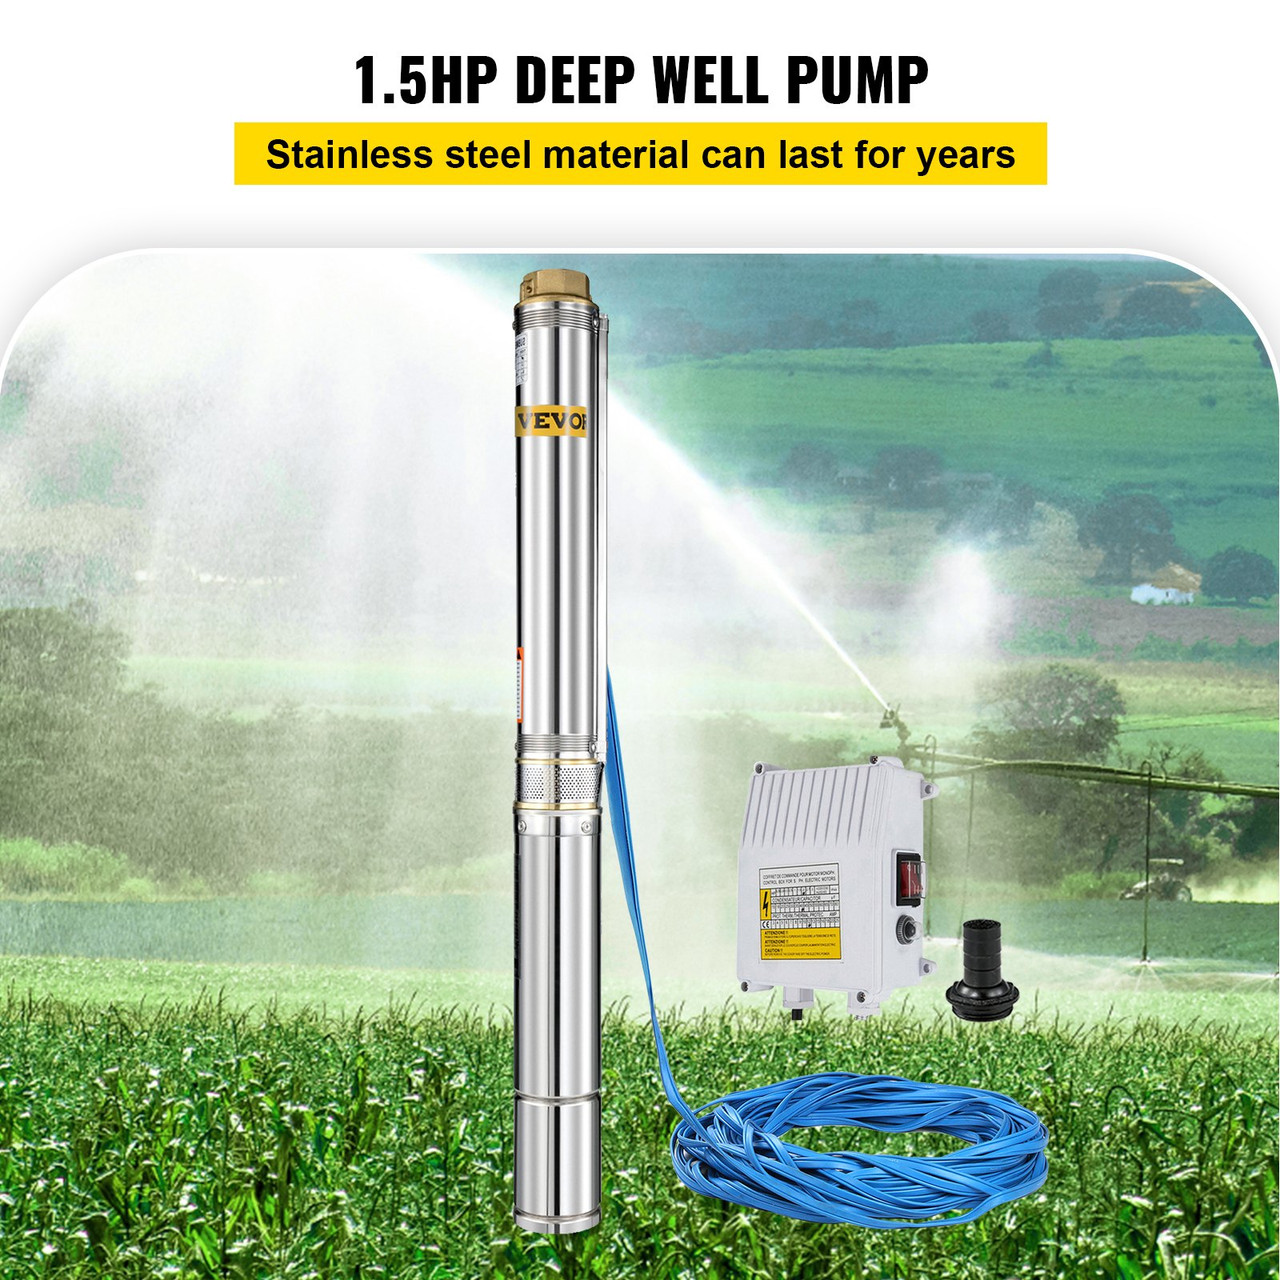 Well Pump 1.5 HP Submersible Well Pump 390ft Head 24GPM Stainless Steel Deep Well Pump for Industrial and Home Use